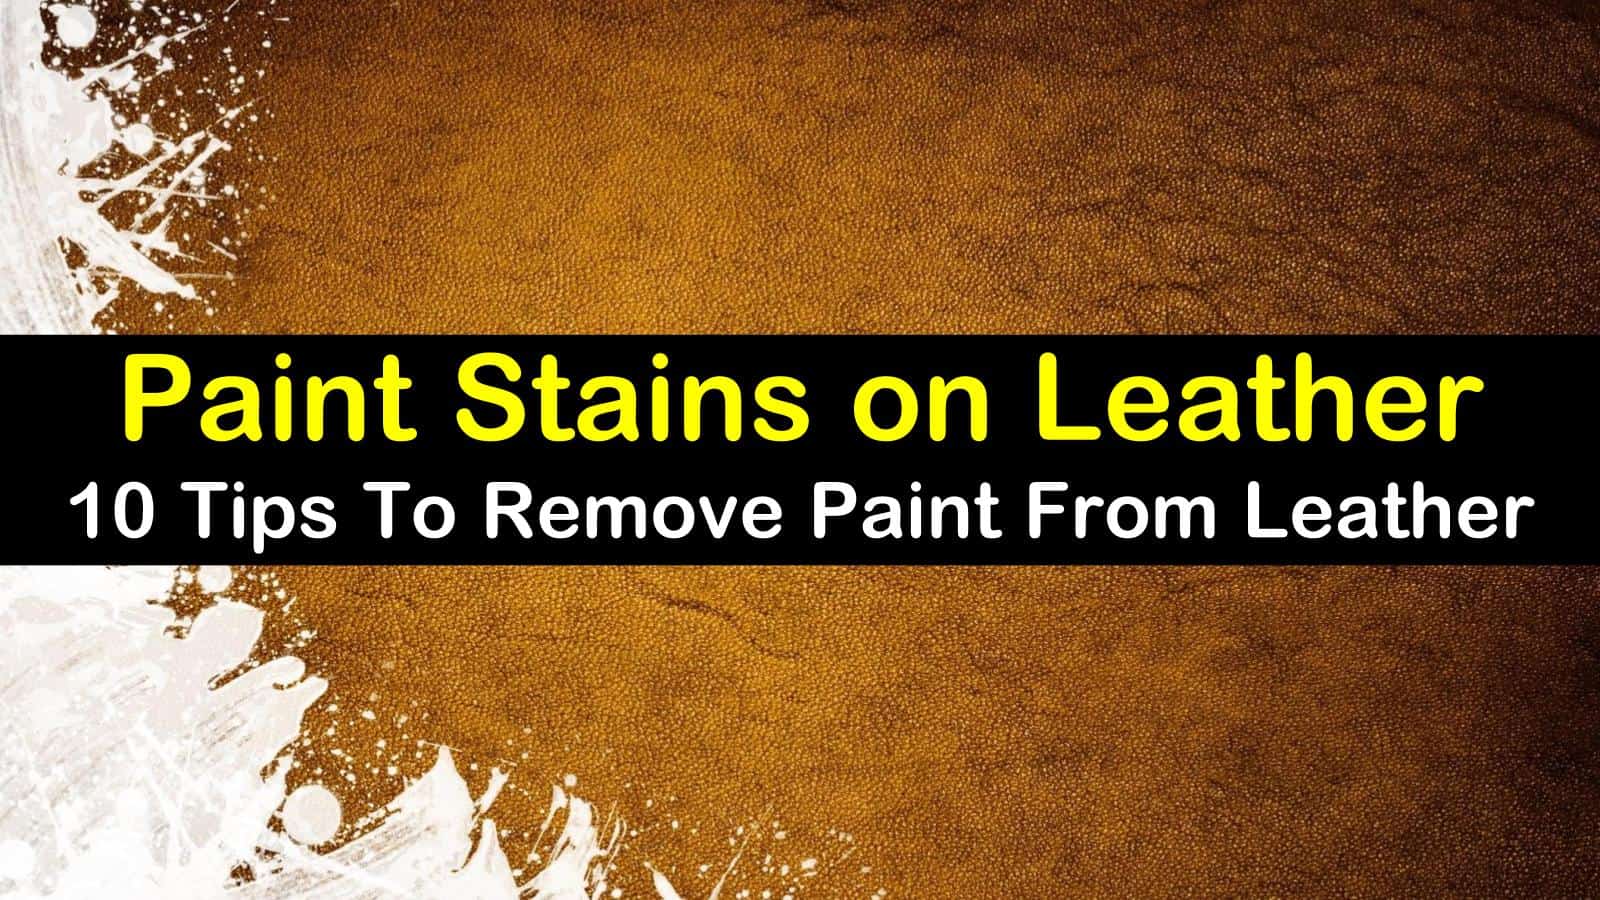 10 Fantastic Ways To Remove Paint From Leather - How To Get Dried Paint Out Of Leather Seats